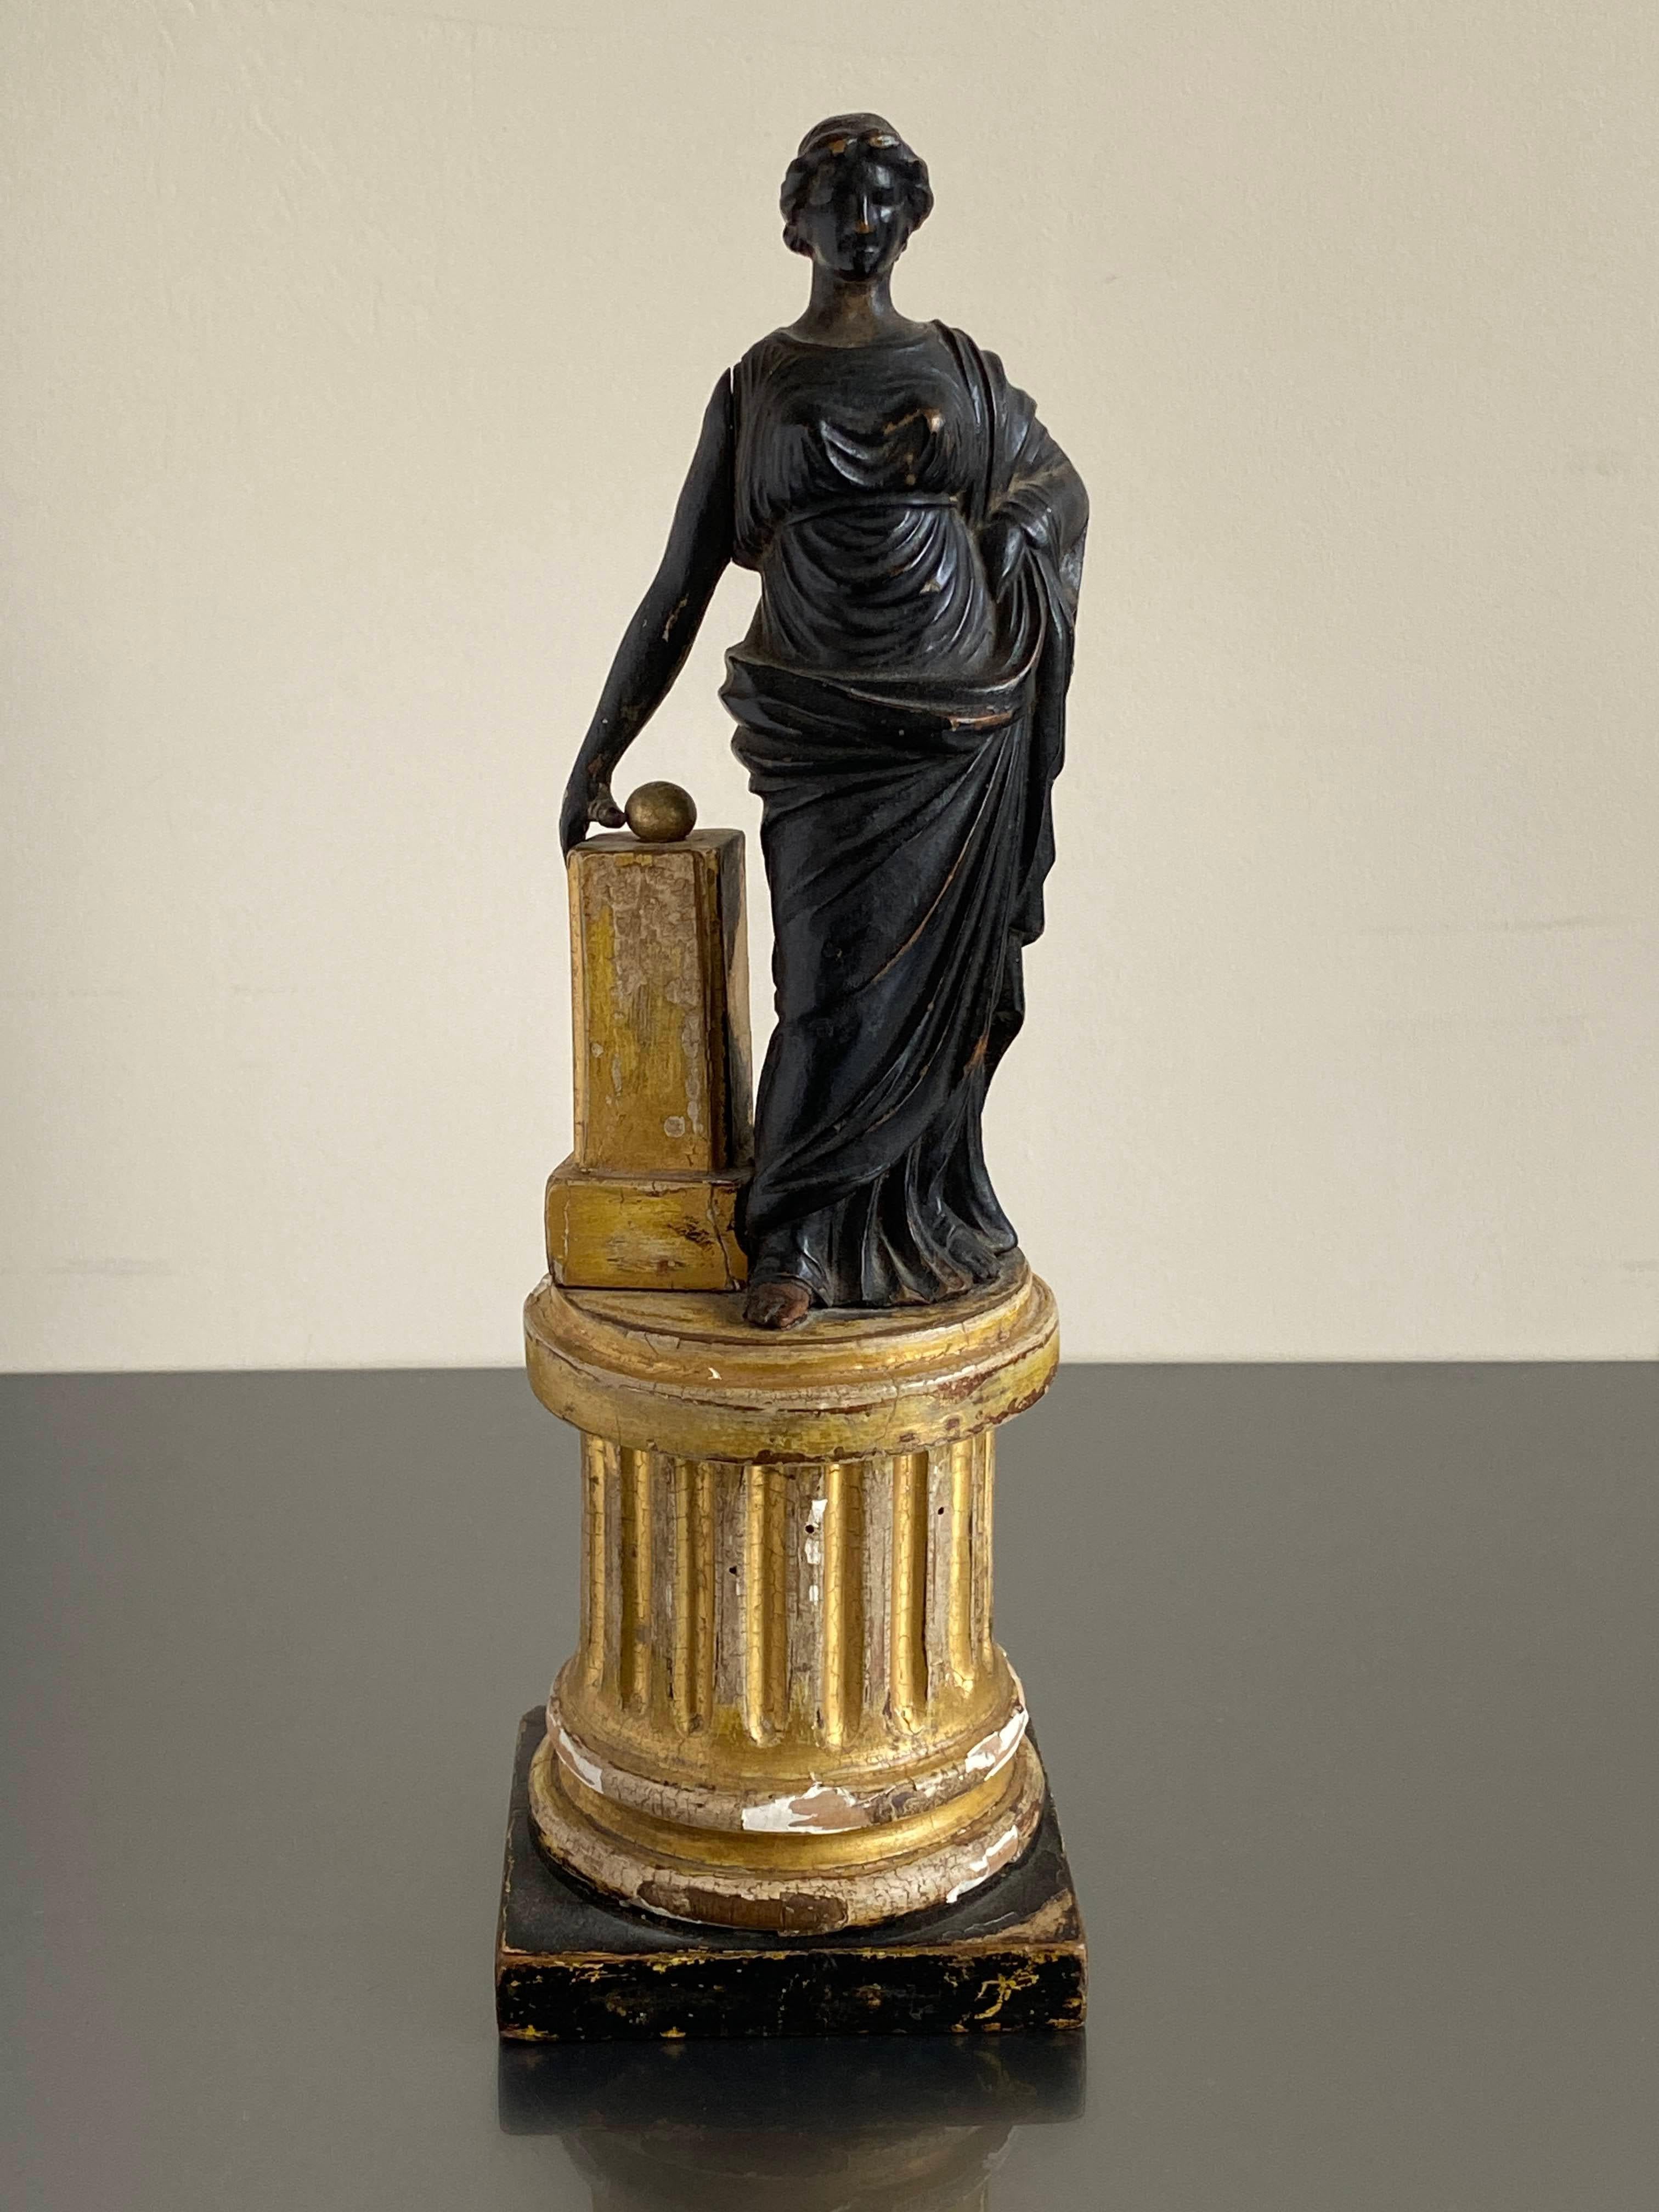 Neoclassical Late 18c Carved Statue of the Roman Goddess 'Fortuna' Standing on a Fluted Gilt